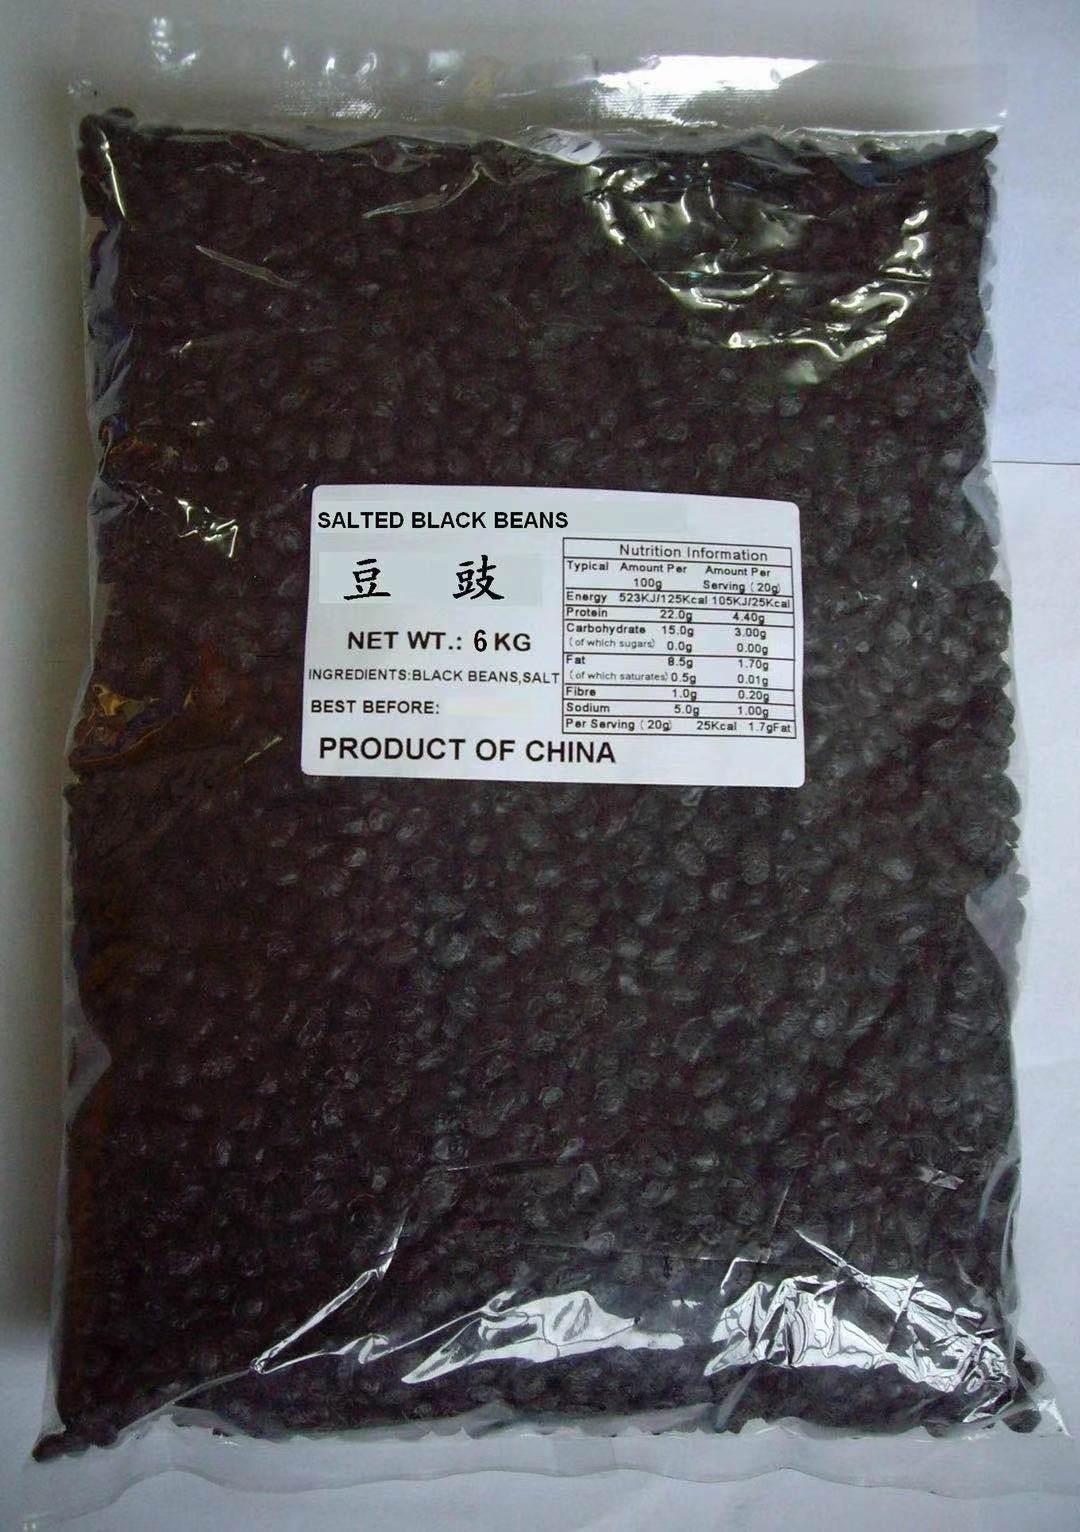 Delicious bagged salted black beans